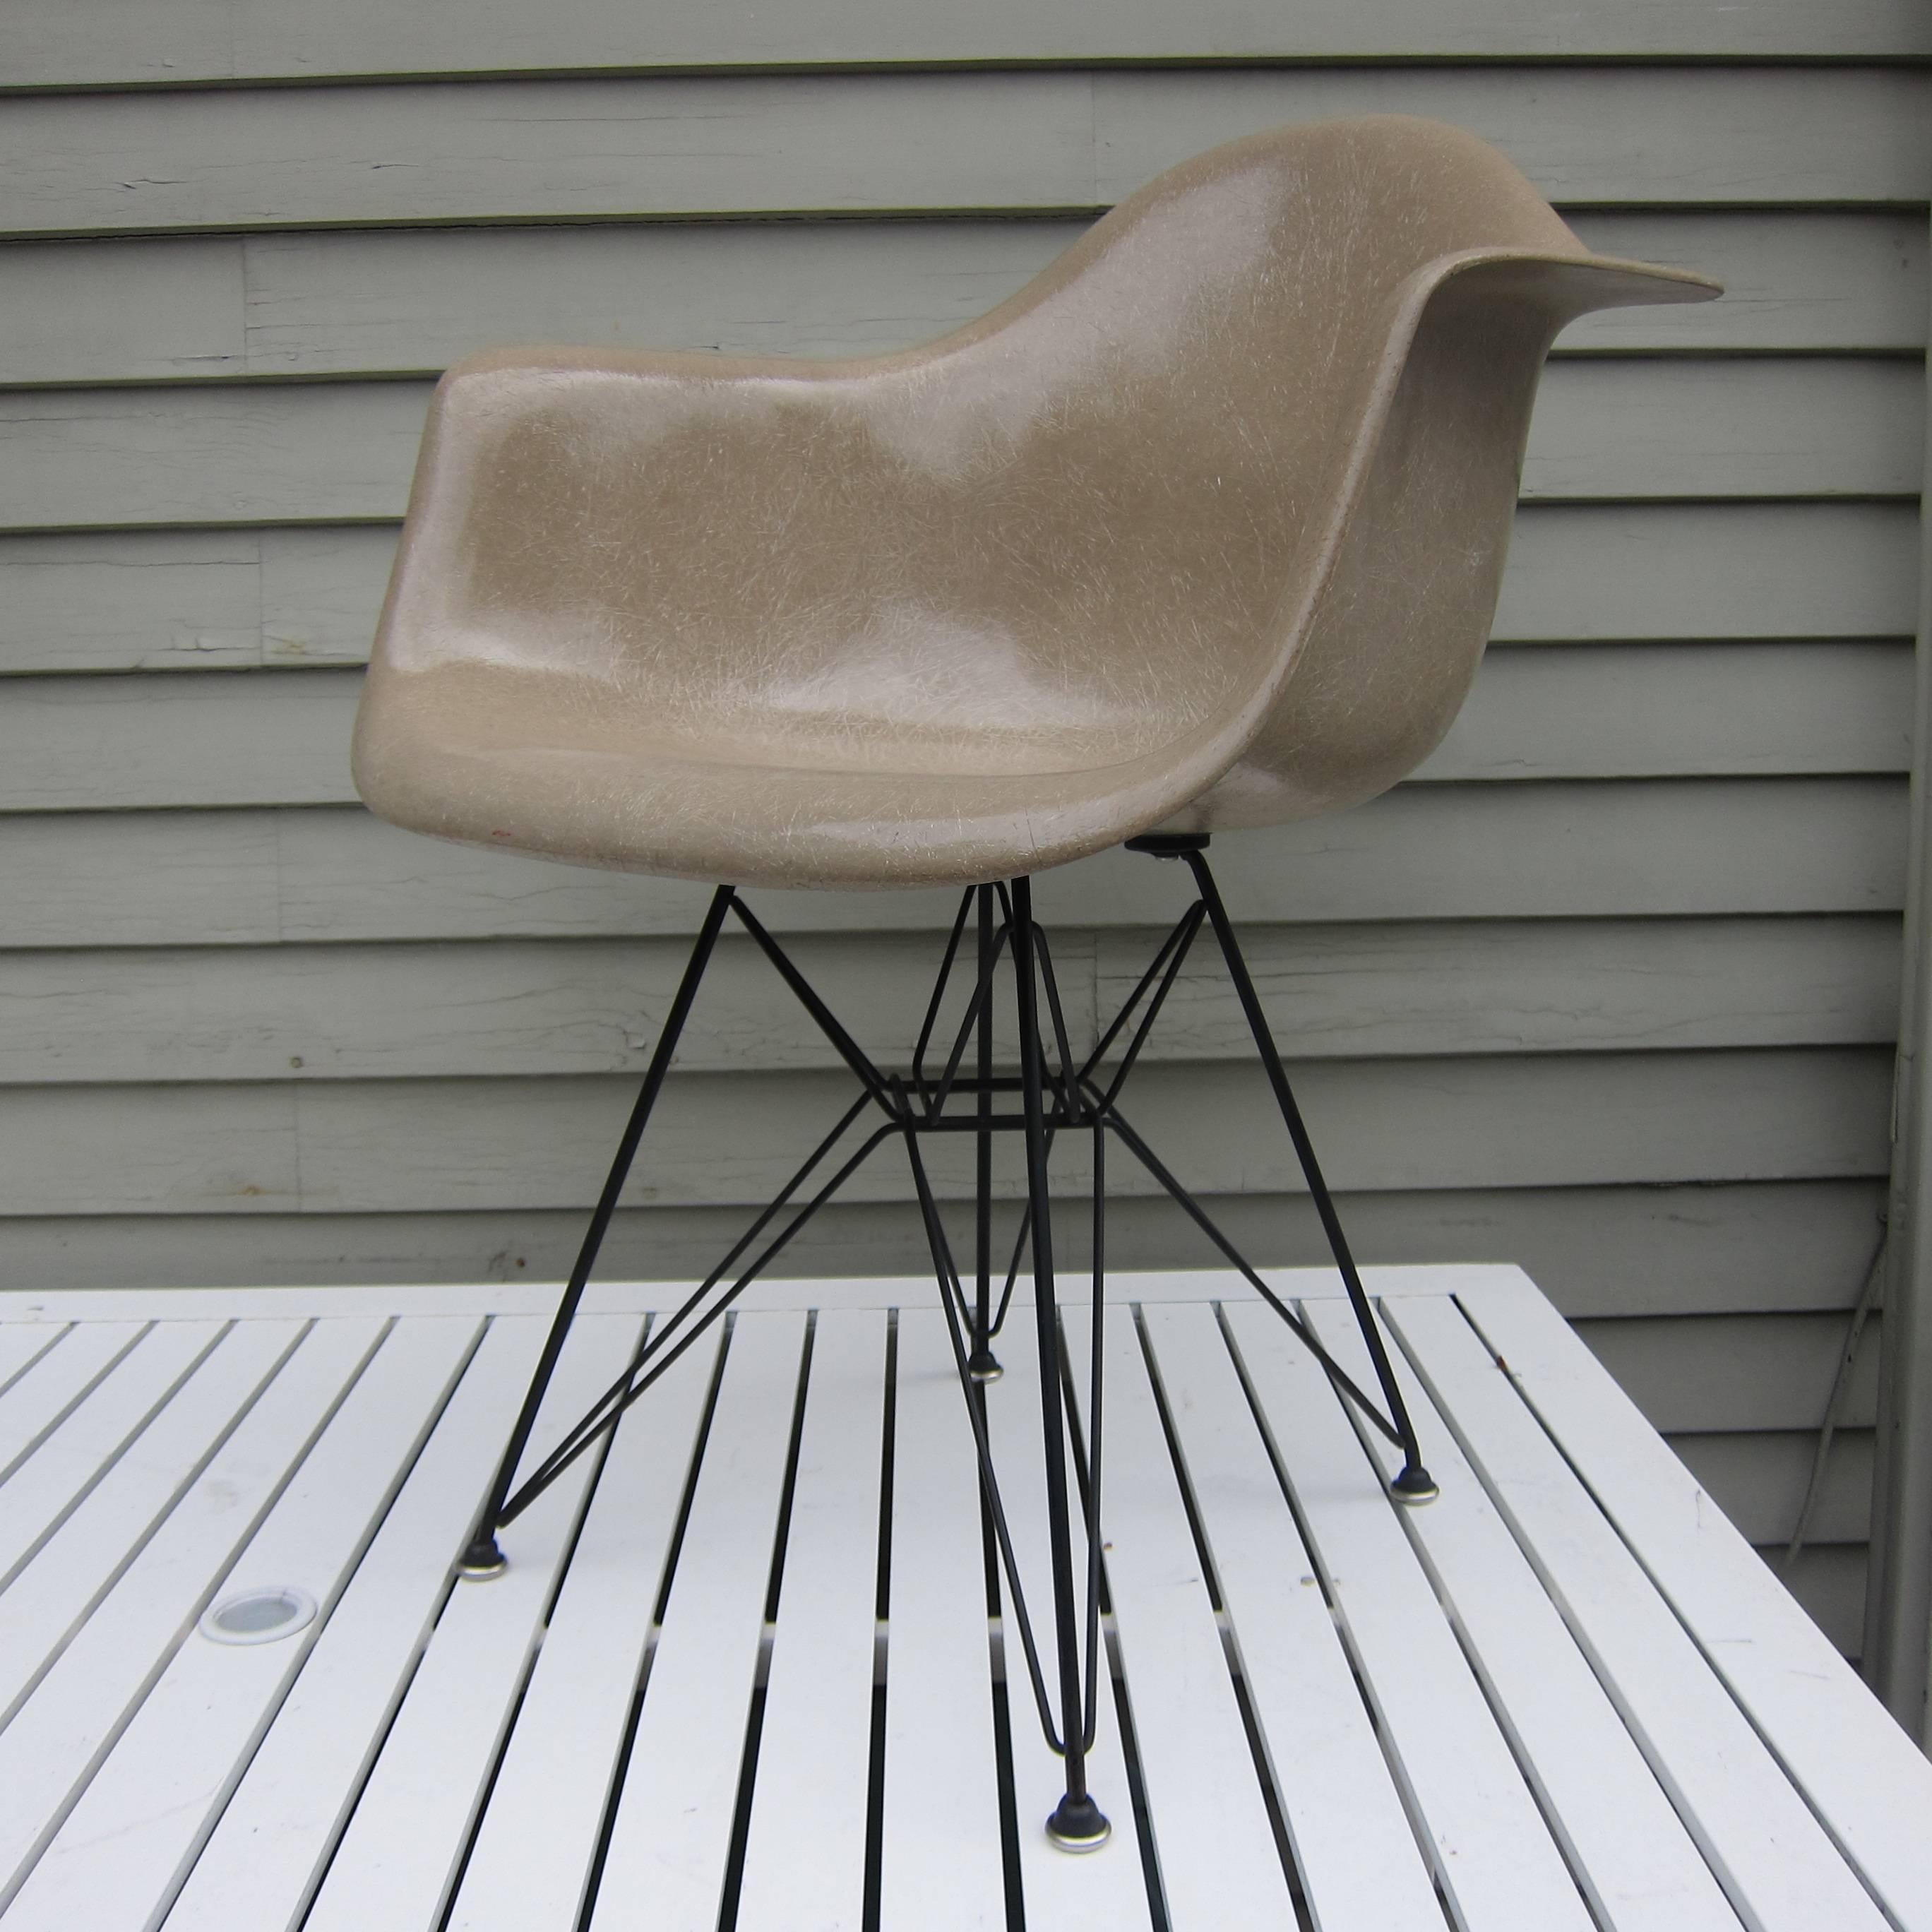 Herman Miller Eames DAR armchair in Greige with Eiffel base and original boot glides. Amazing color with near perfect base. Excellent fiberglass contrast. There is a paper Herman Miller patent label on bottom but the shell is not otherwise embossed,